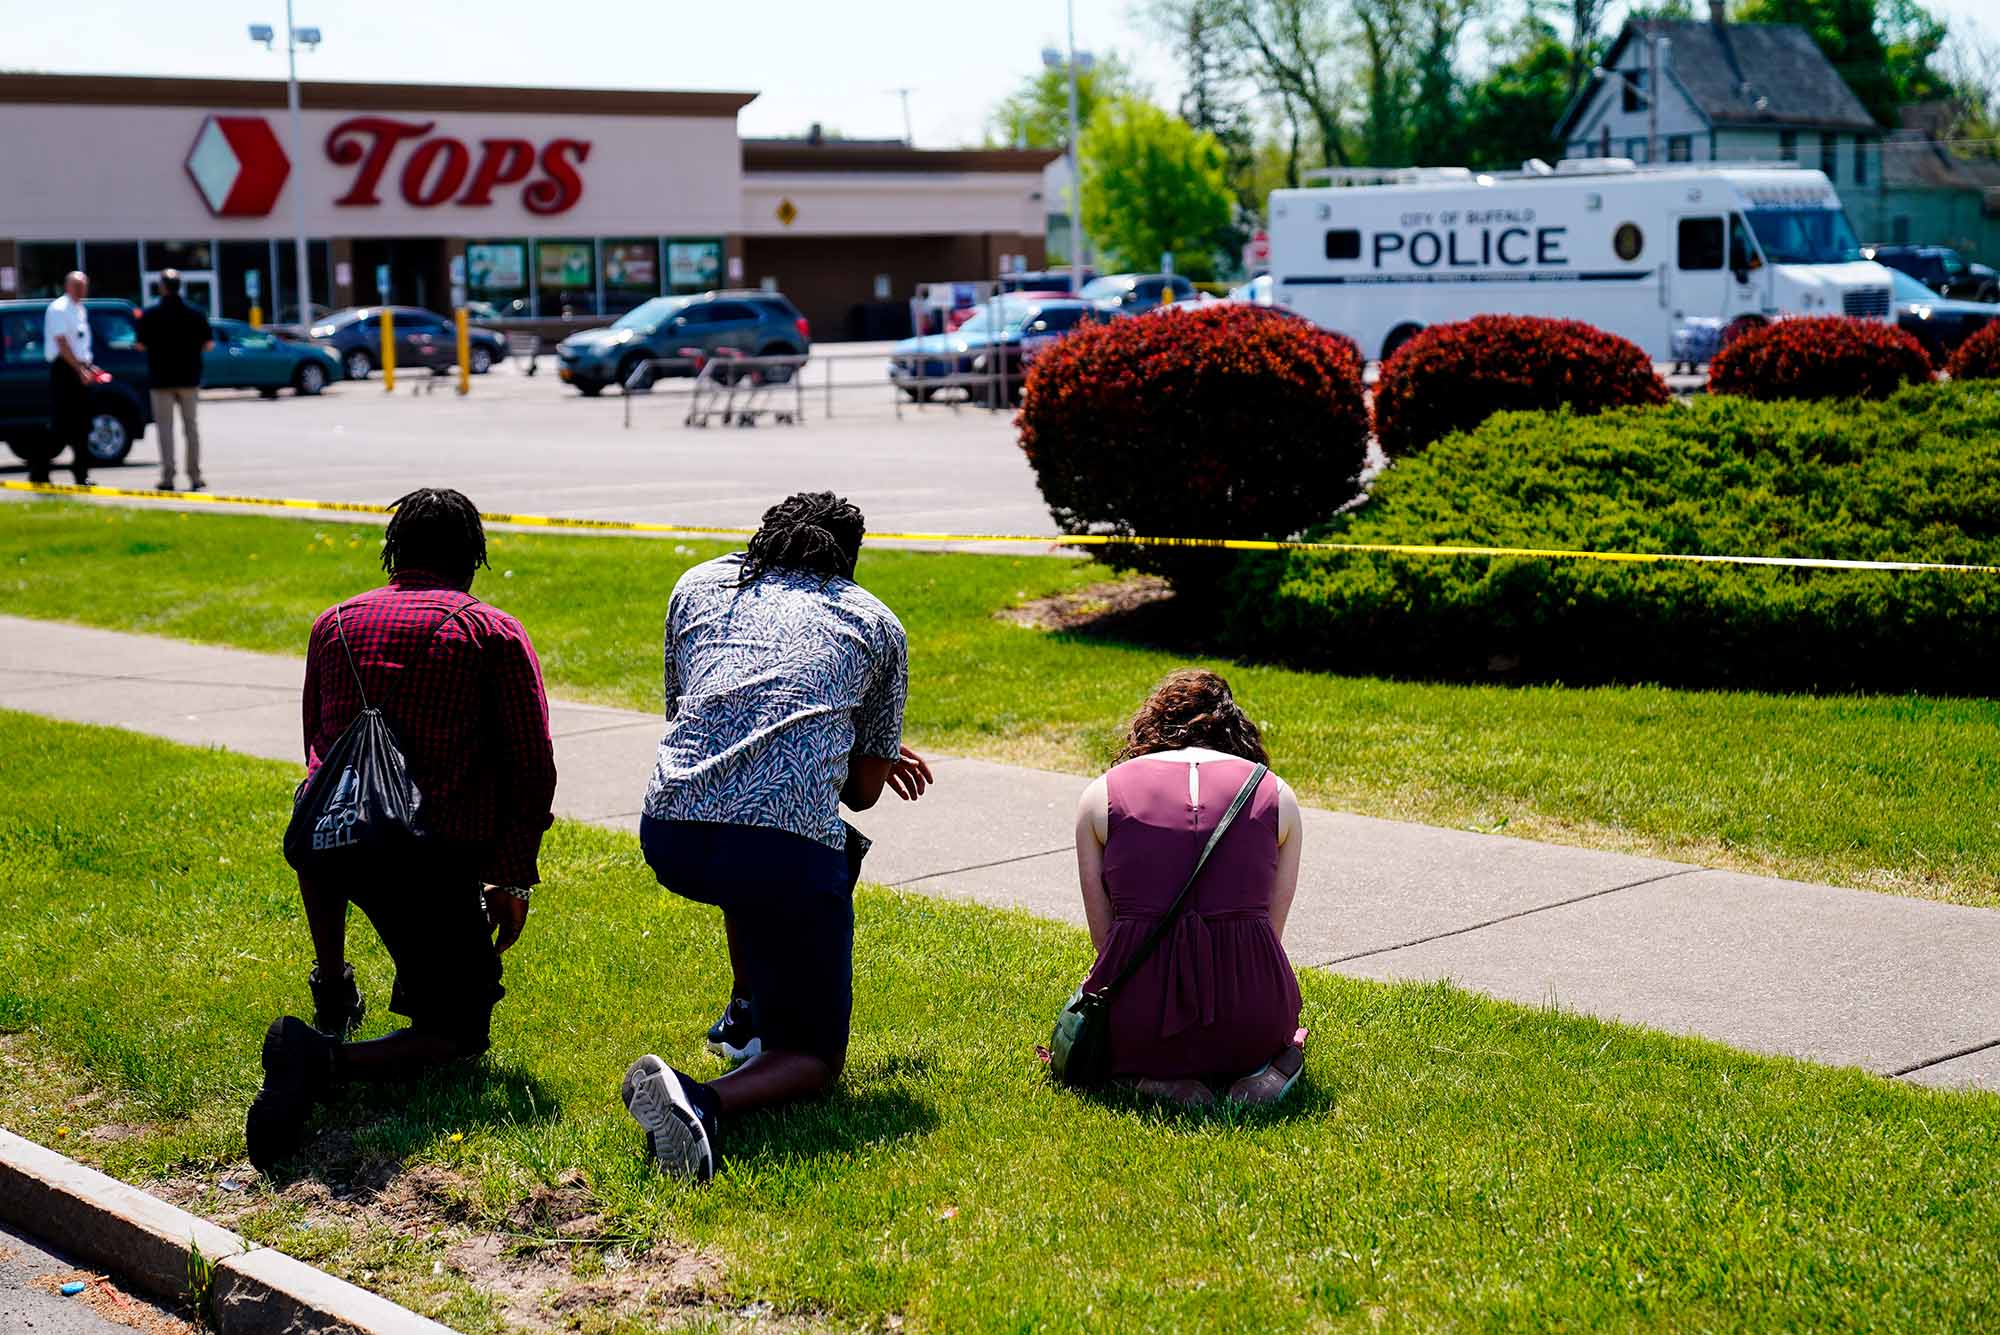 Photo of people praying, two young Black men and one White women, outside the scene of Saturday's shooting at a supermarket, in Buffalo, N.Y., Sunday, May 15, 2022. Behind them, the TOPS supermarket sign is seen across the parking lot. Also in the parking lot a parked police van.